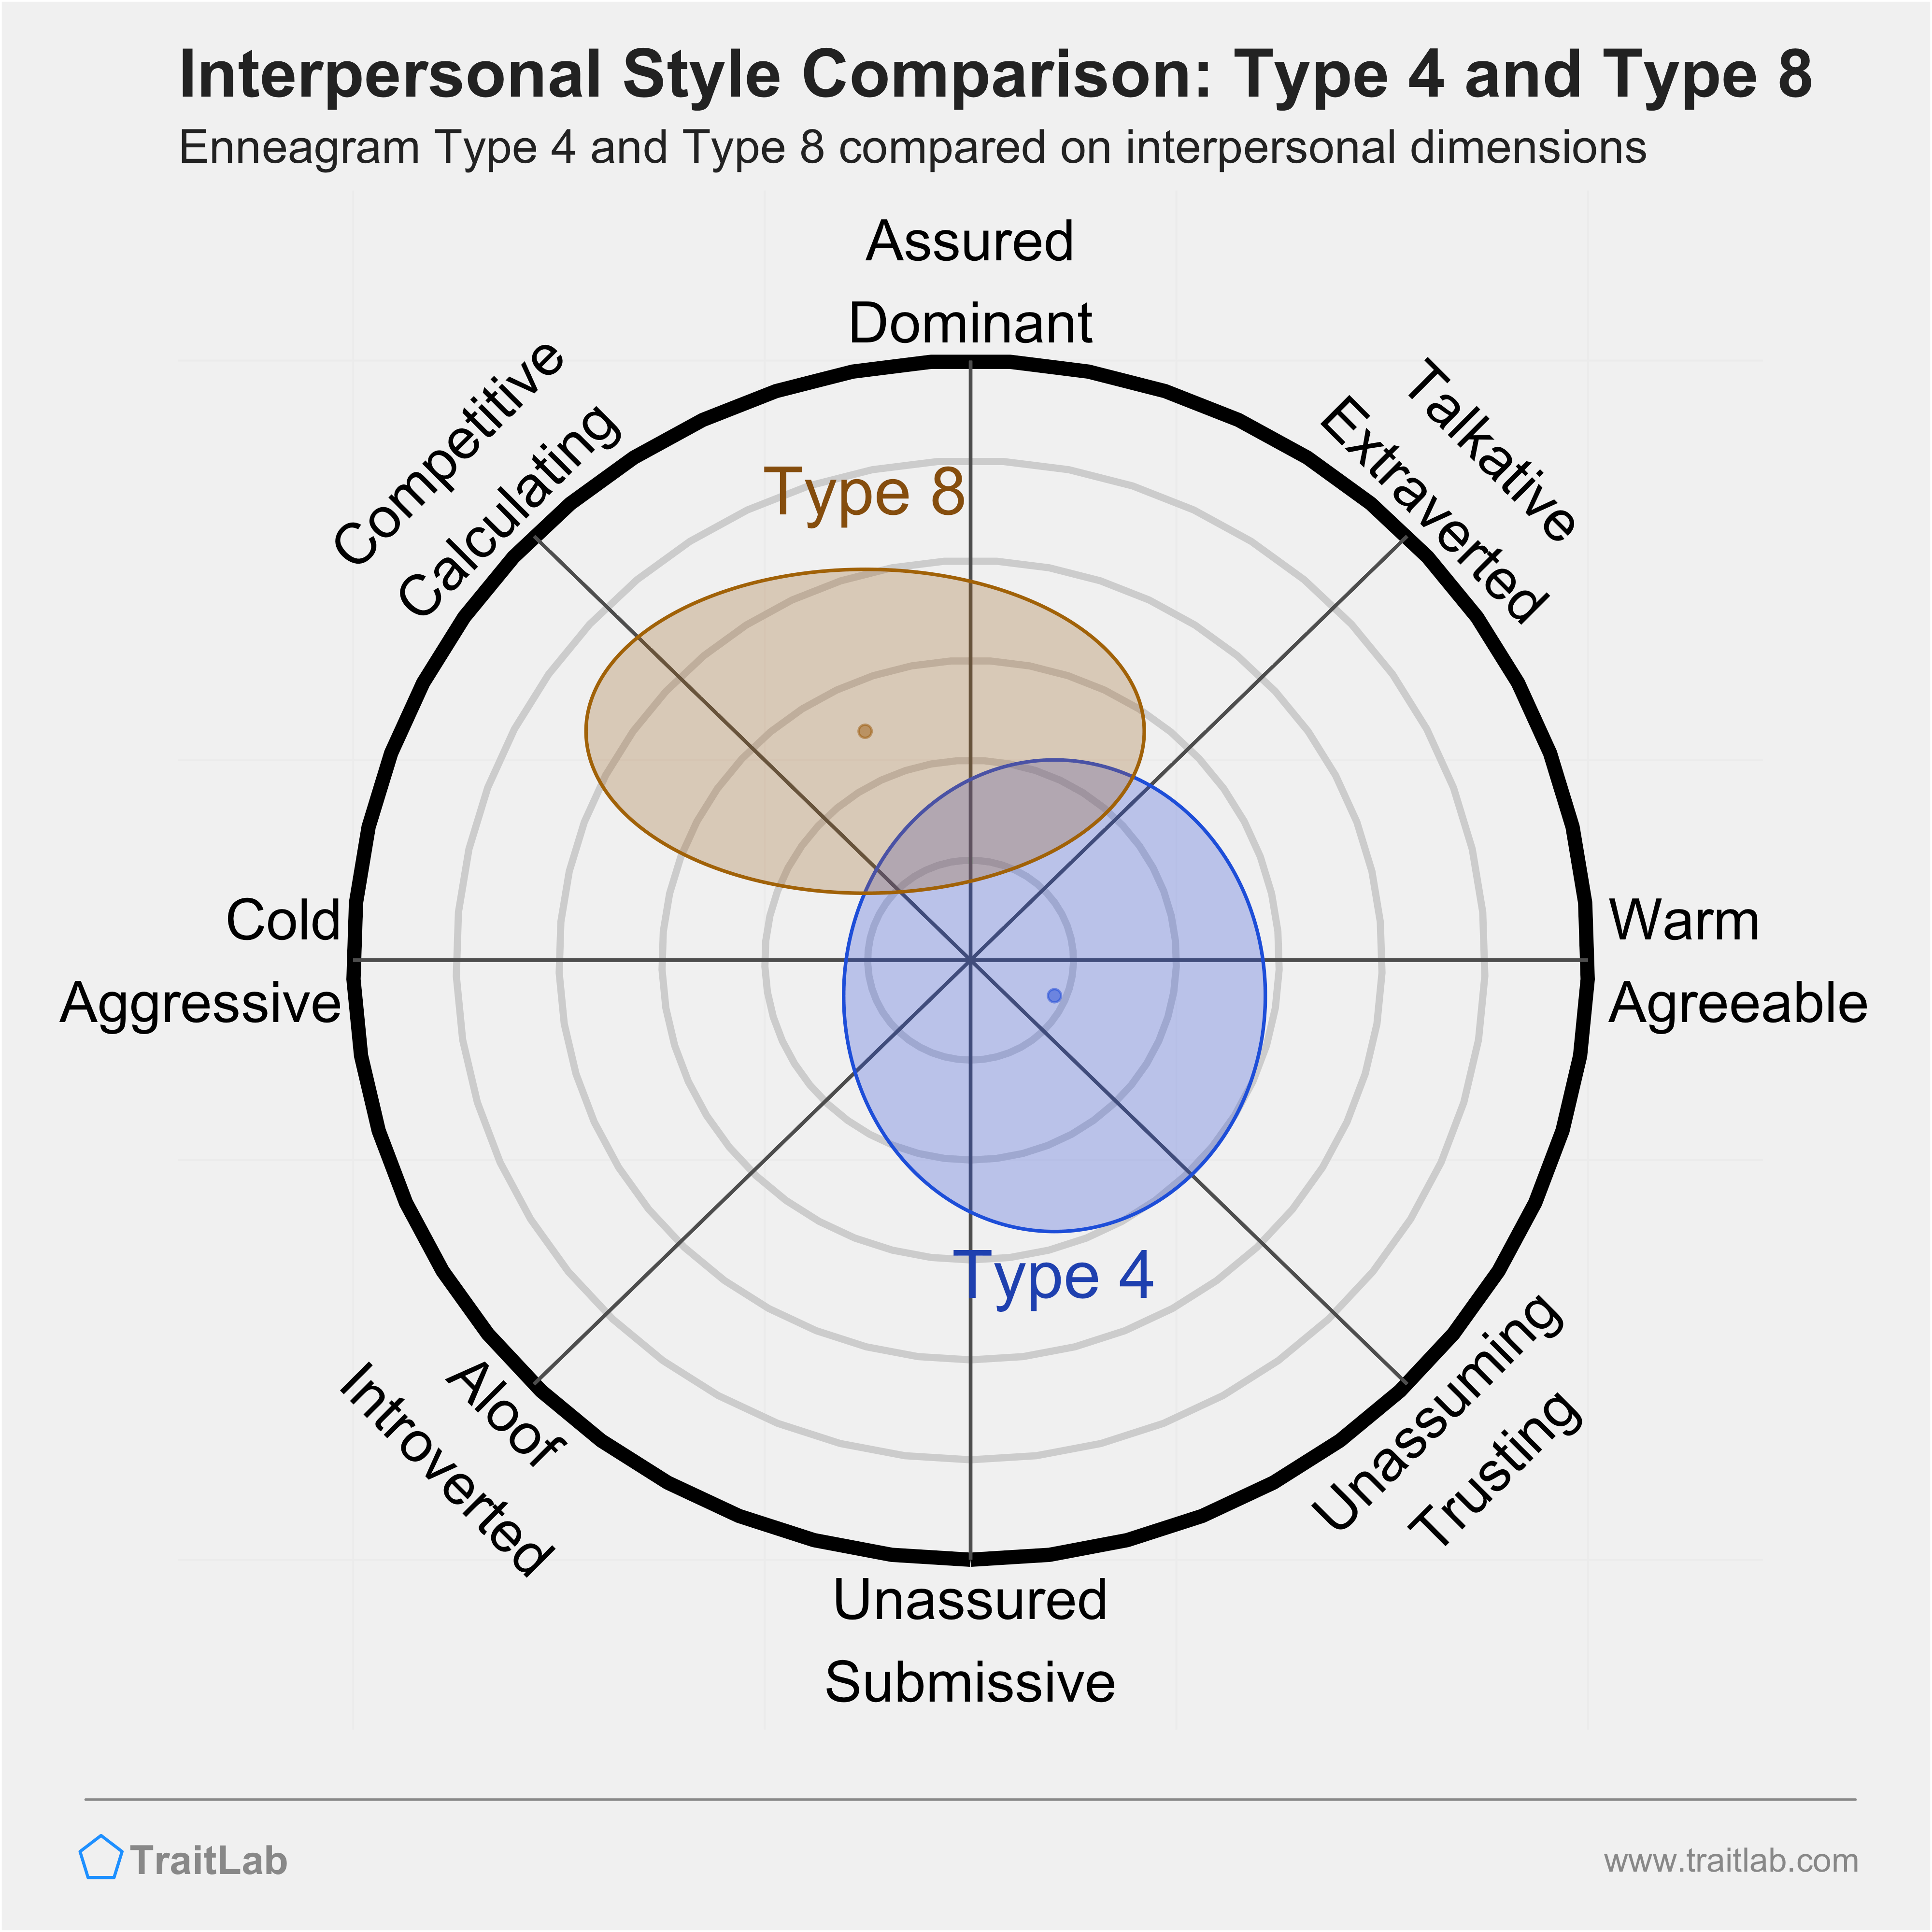 Enneagram Type 4 and Type 8 comparison across interpersonal dimensions